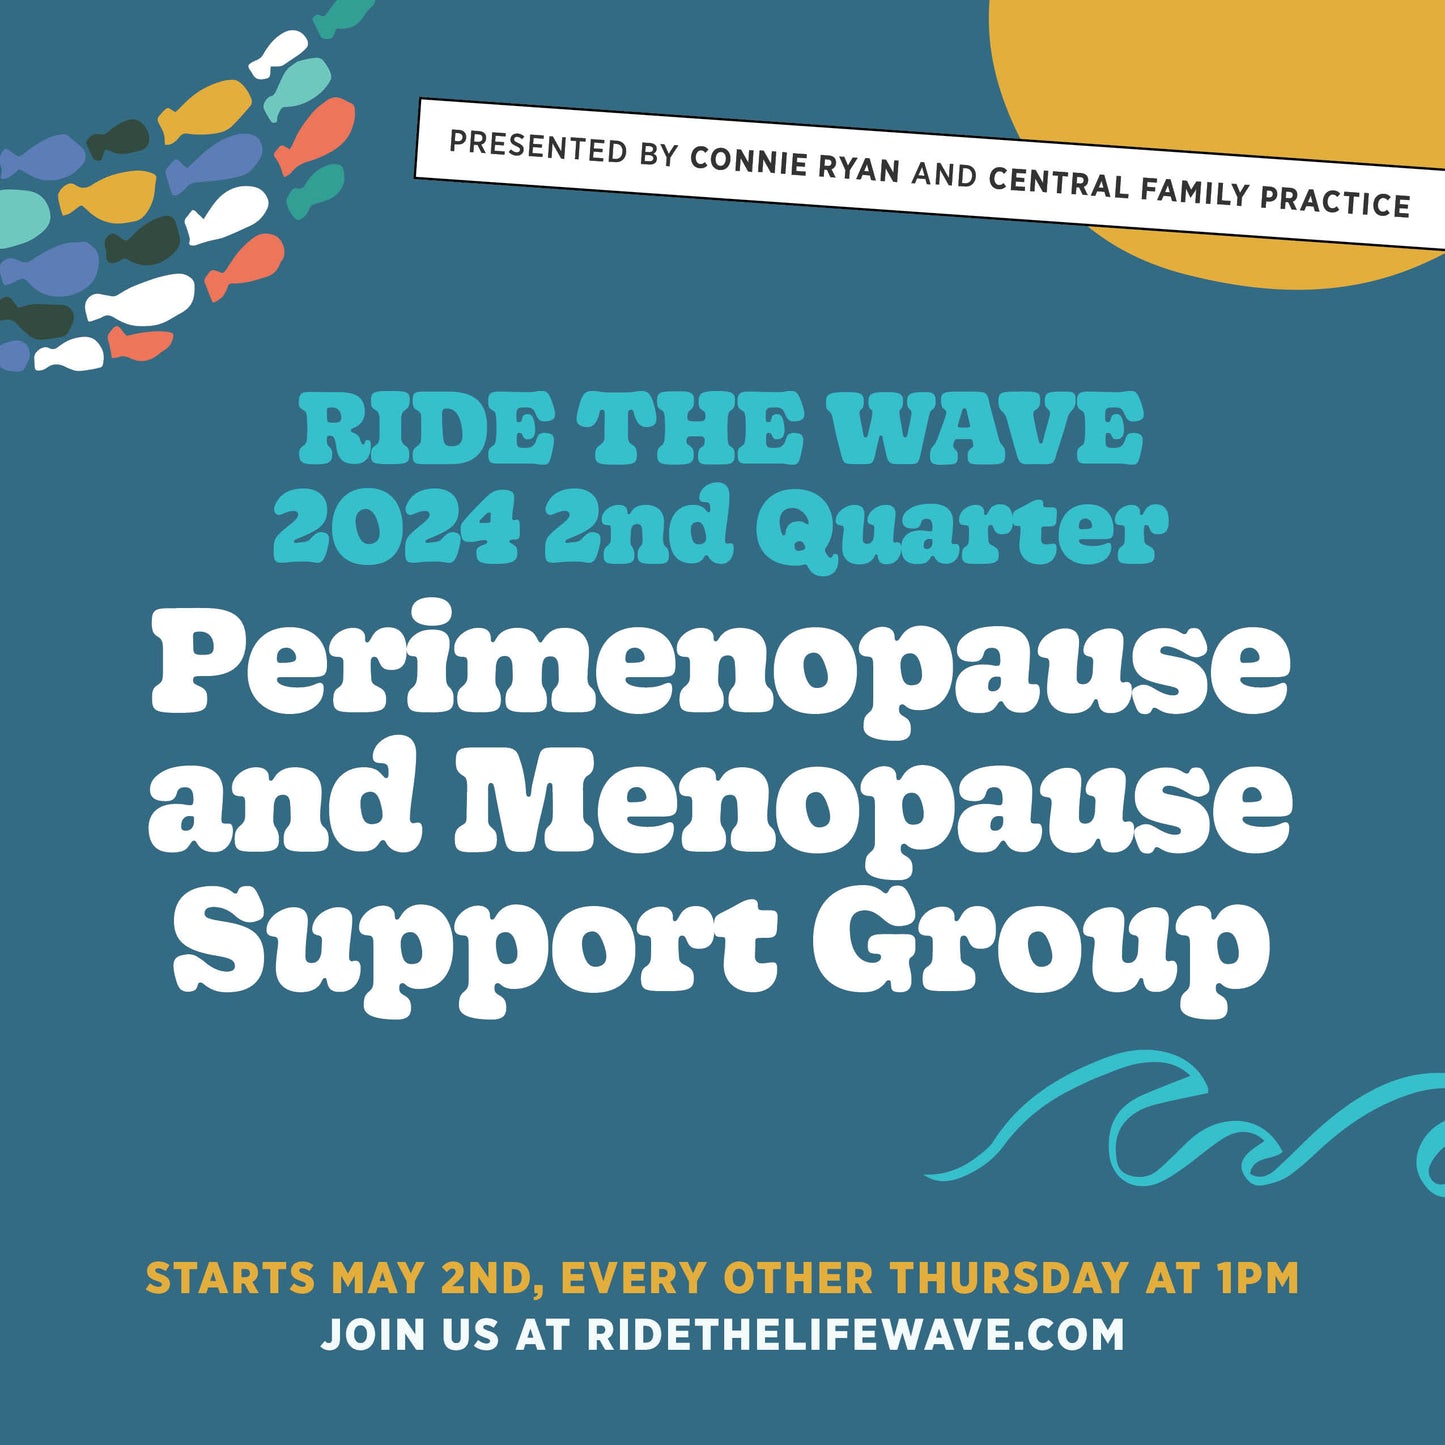 Ride The Wave 2024 2nd Quarter: Perimenopause and Menopause Support Group